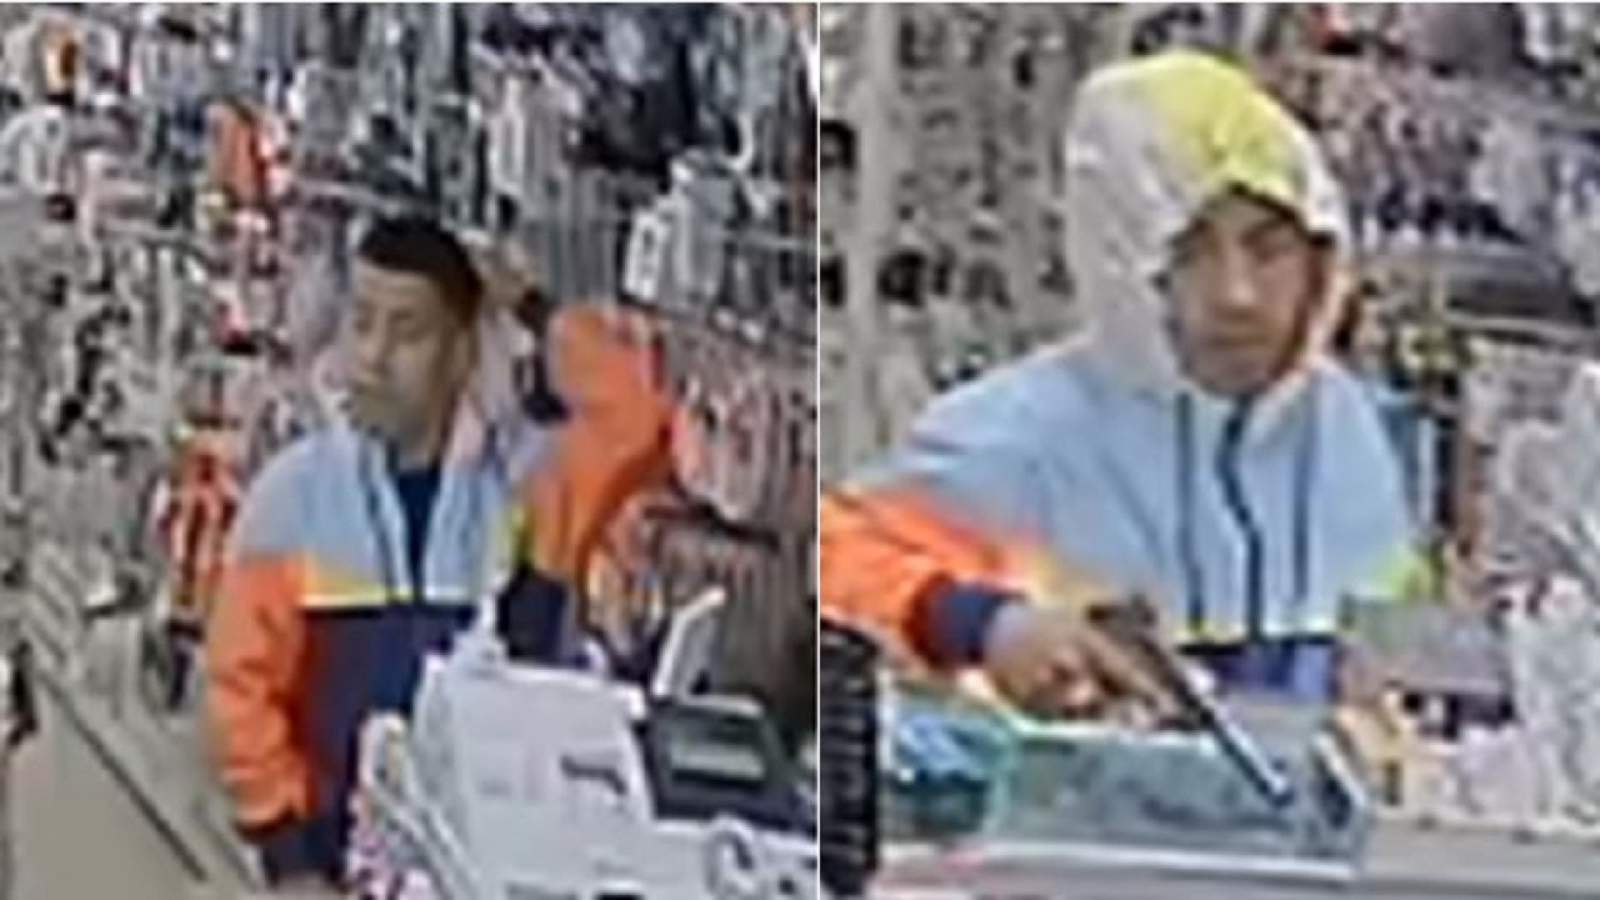 Man brandishes gun, fires shots at store during robbery attempt, police say